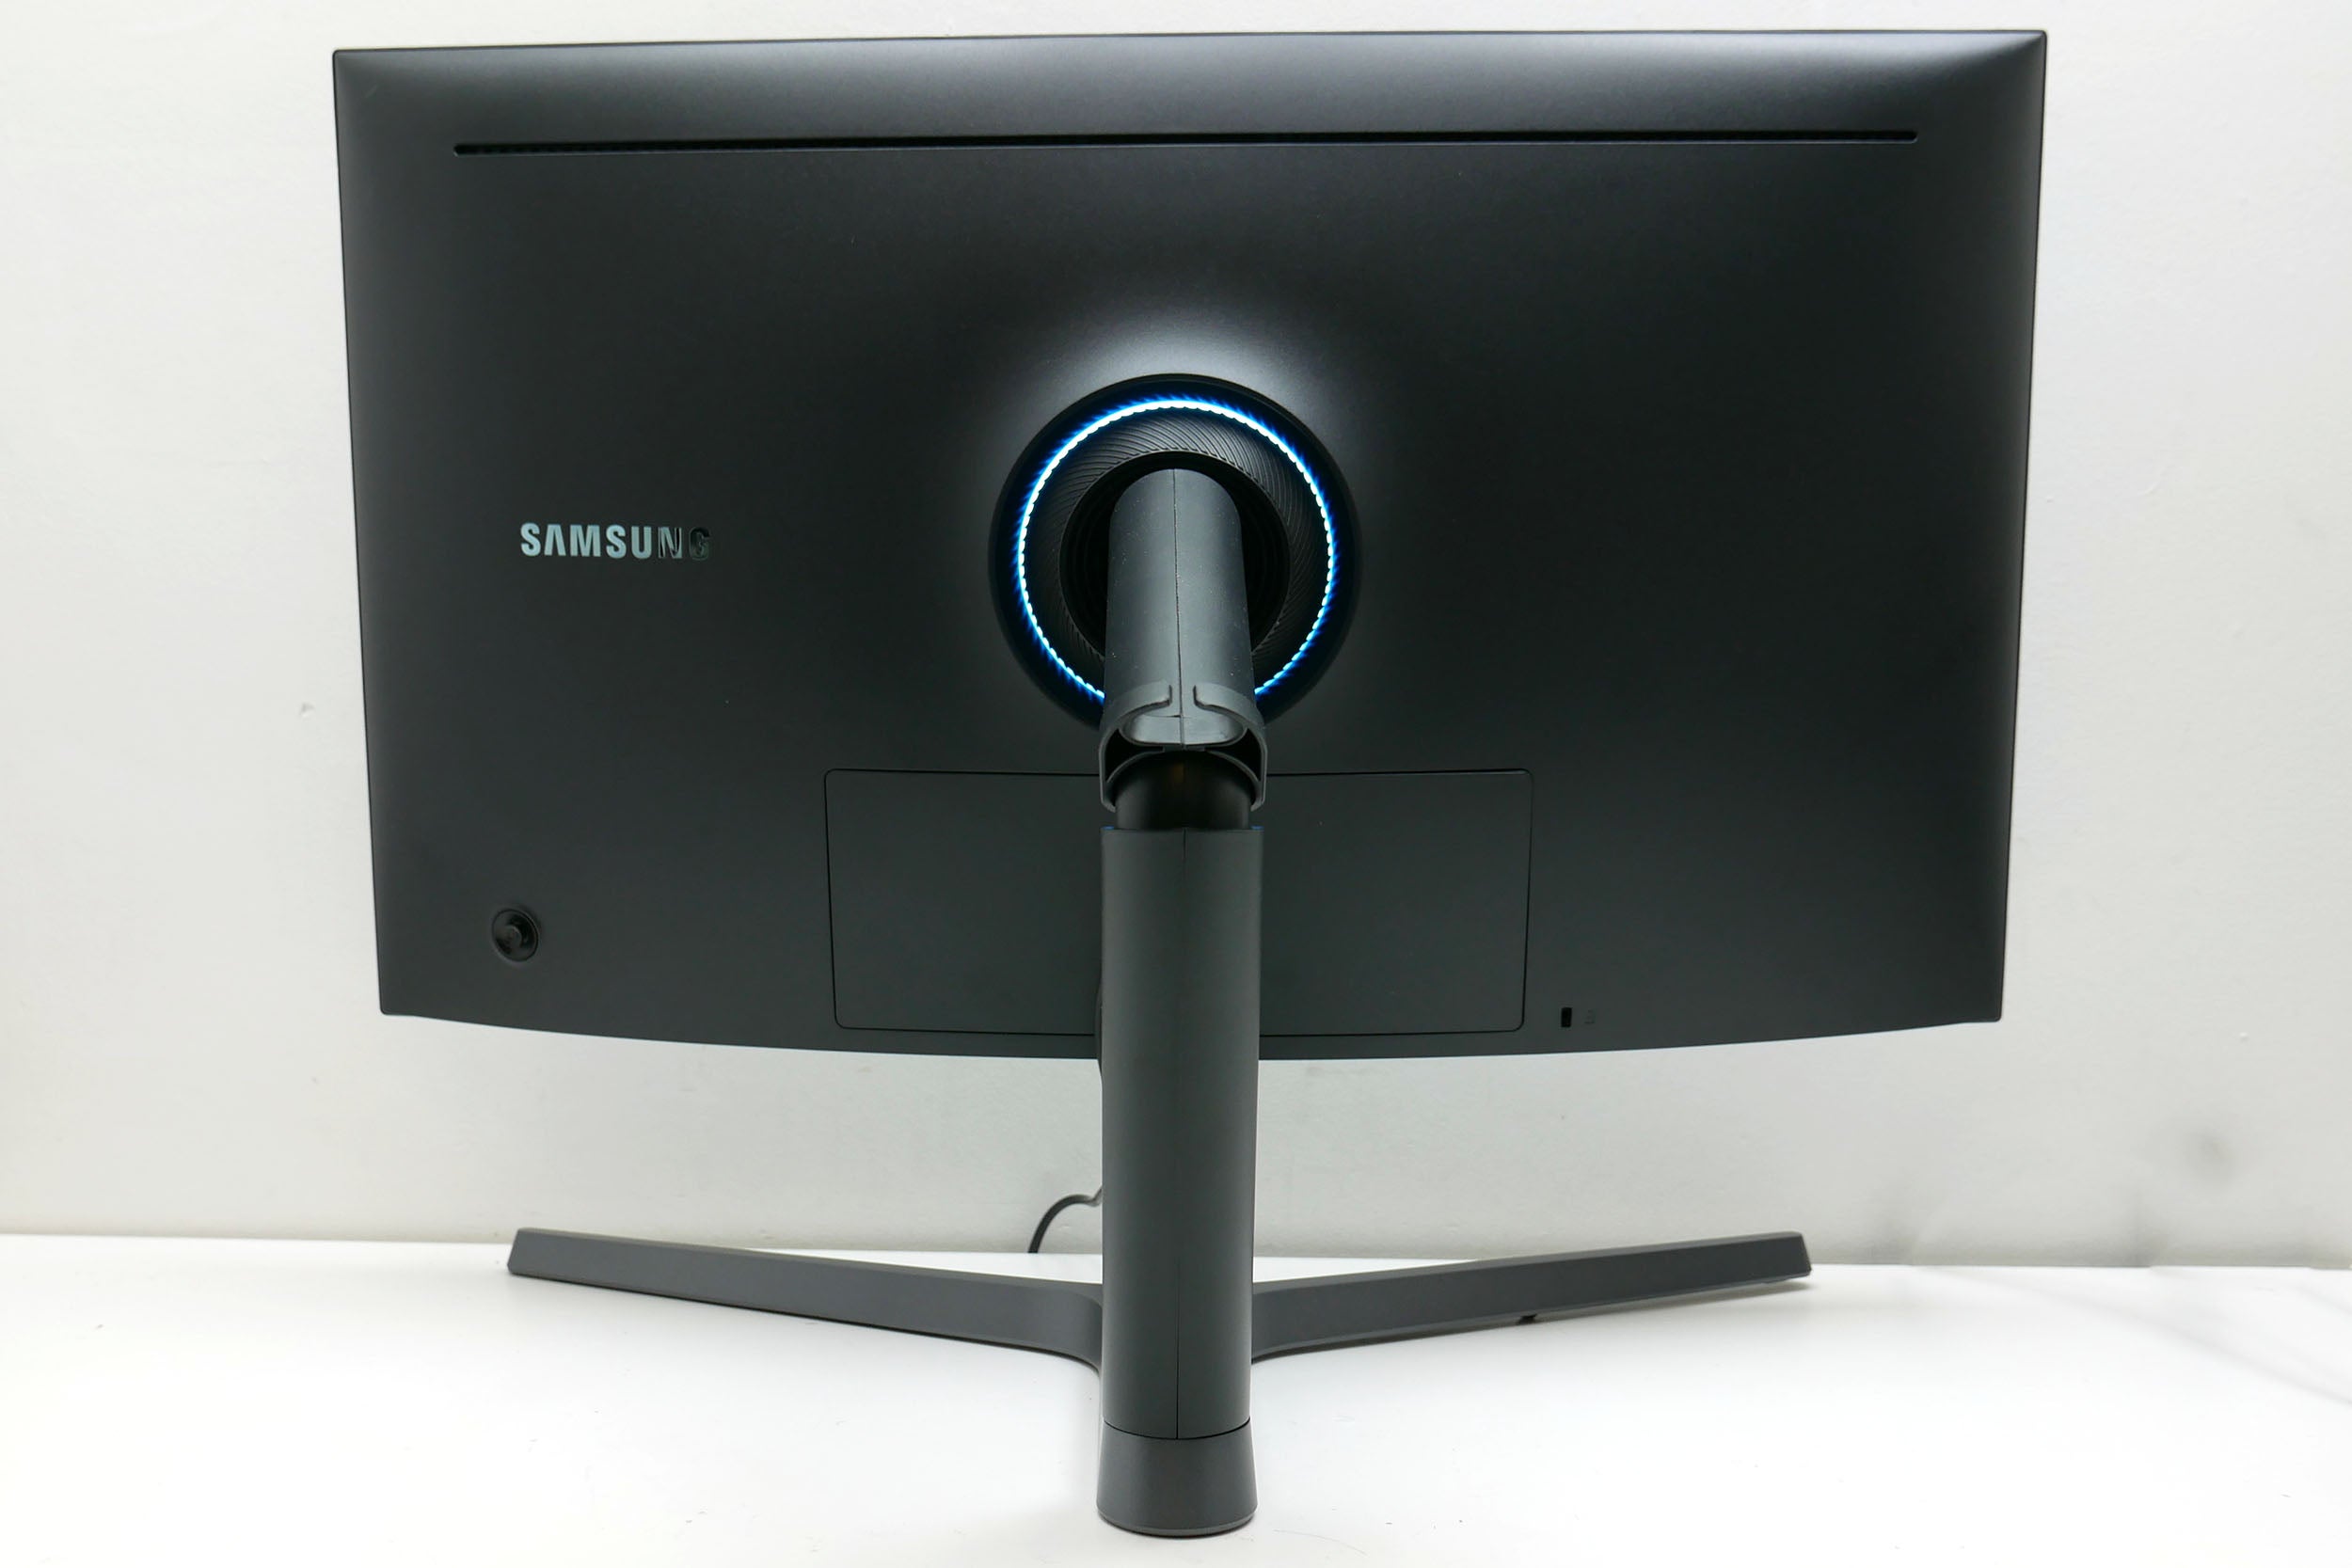 Samsung CHG70 monitor rear view showing stand and backlight.